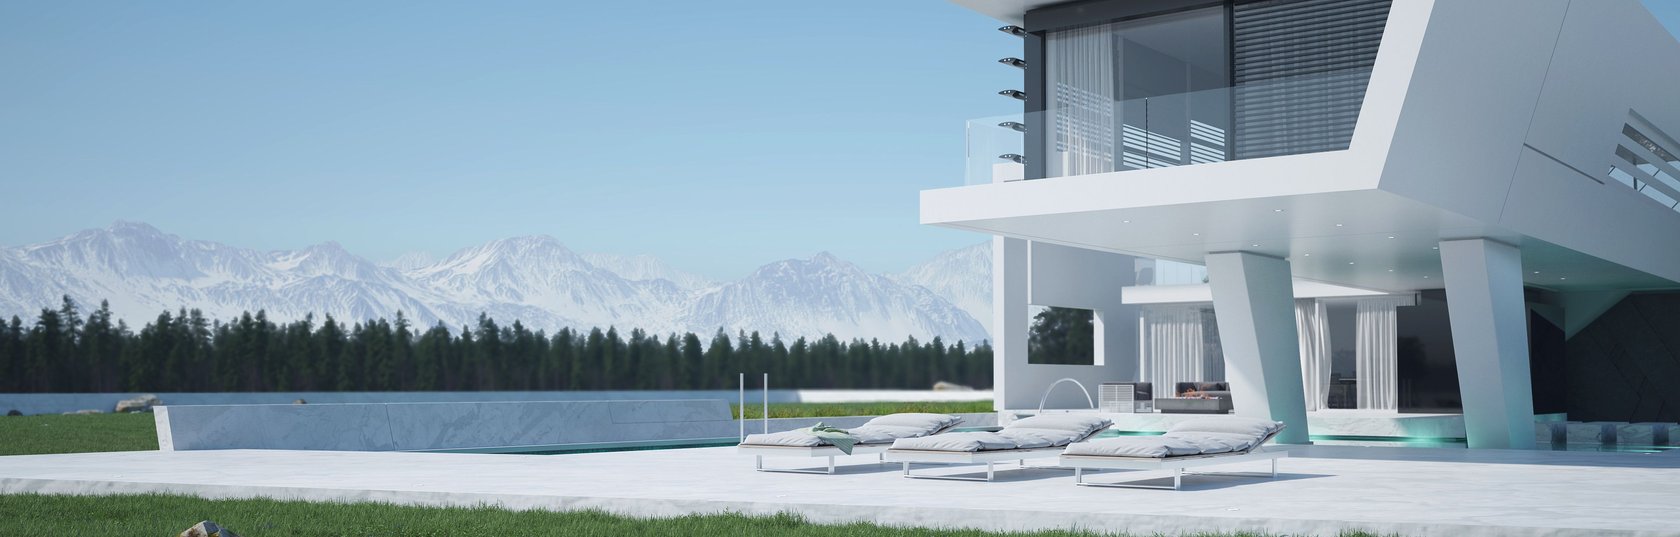 Bringing unbuilt projects to life: the power of 3D renders